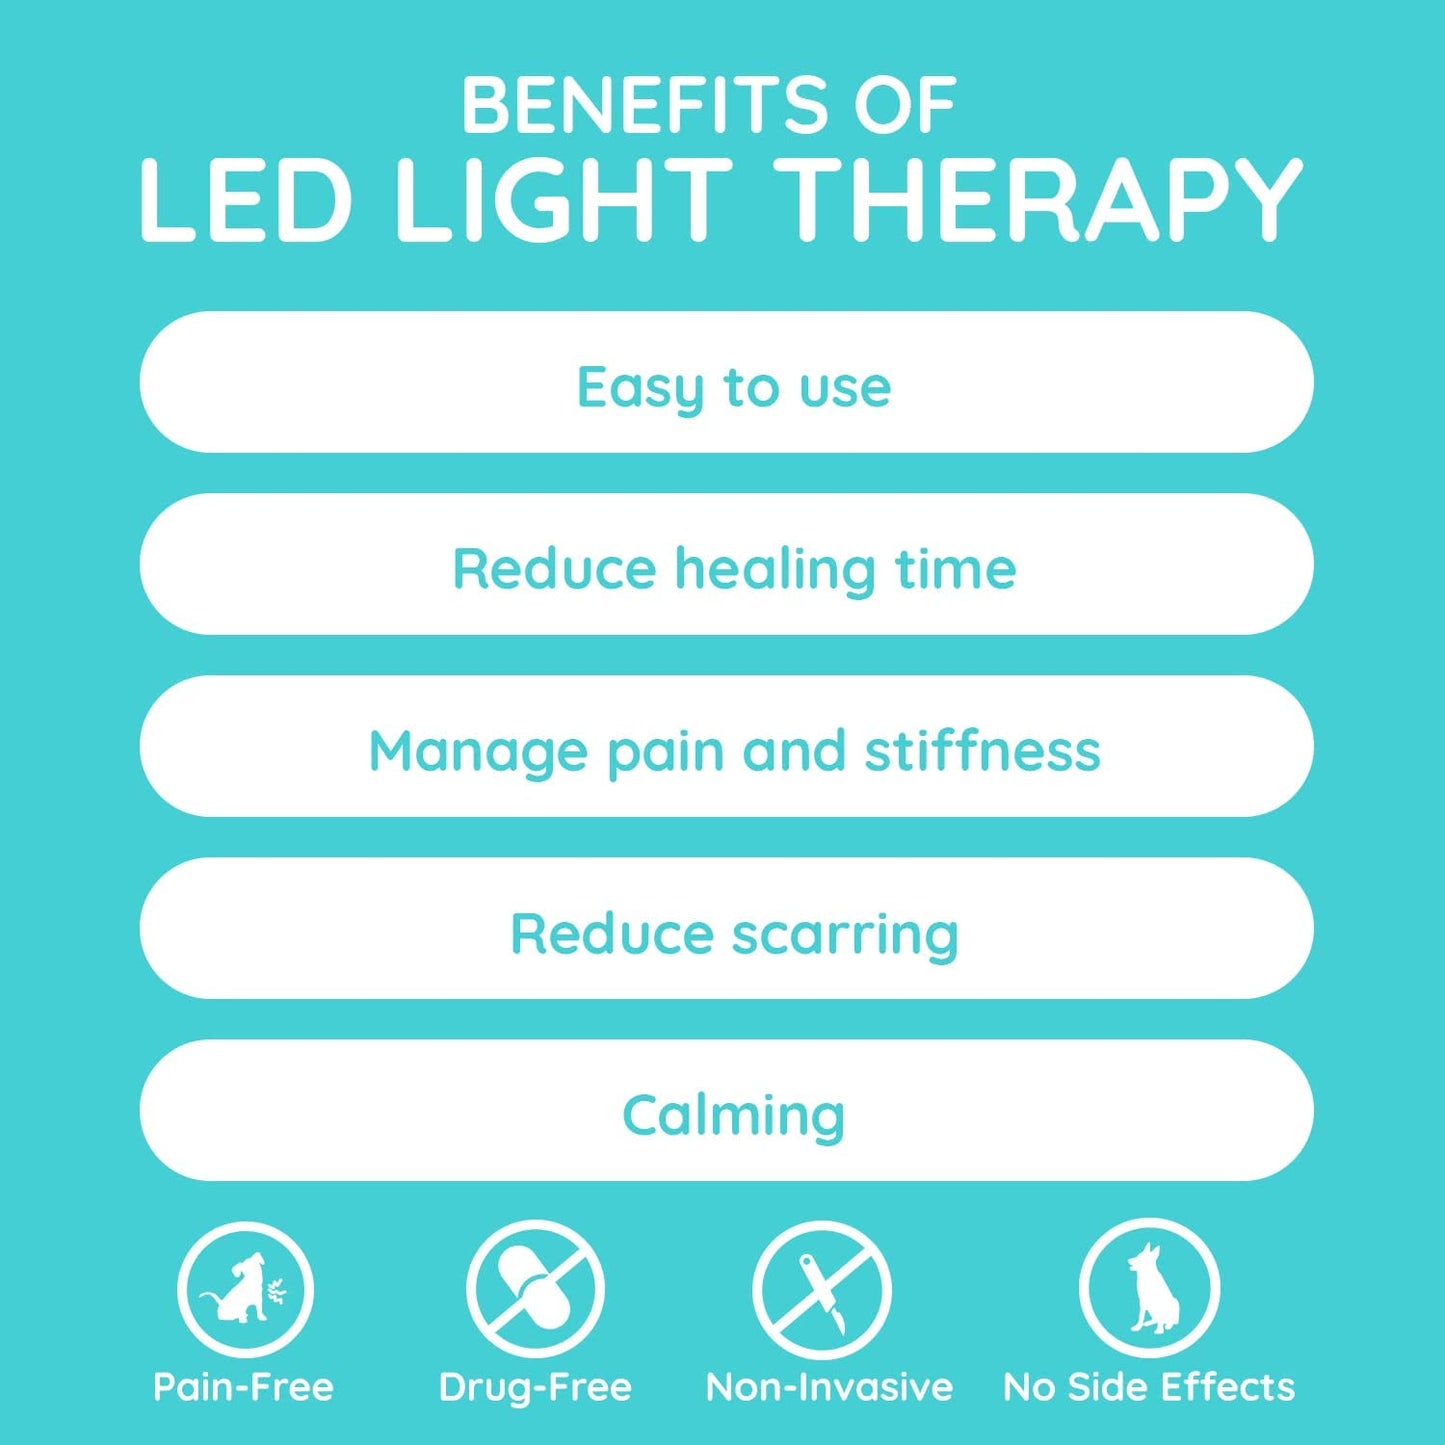 Benefits of LED Light Therapy for pets